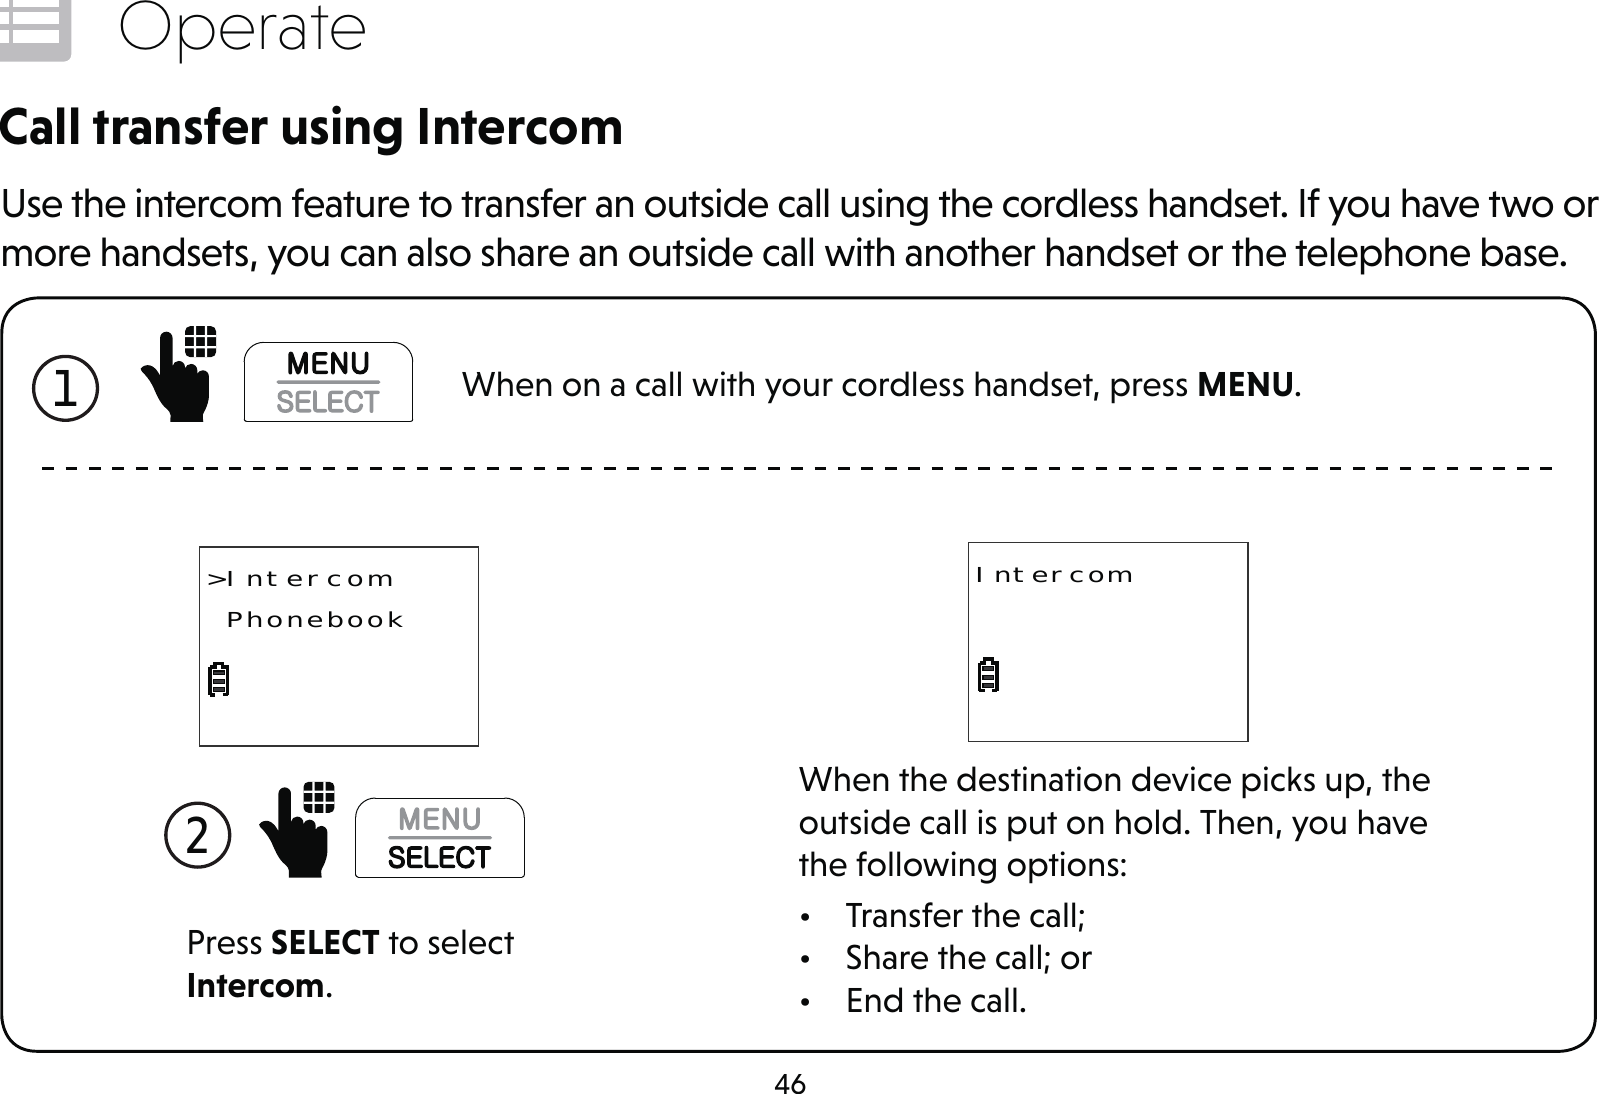 46OperateCall transfer using IntercomUse the intercom feature to transfer an outside call using the cordless handset. If you have two or more handsets, you can also share an outside call with another handset or the telephone base.Press SELECT to select Intercom.2 &gt;Intercom PhonebookWhen the destination device picks up, the outside call is put on hold. Then, you have the following options:•  Transfer the call;•  Share the call; or•  End the call.Intercom1  When on a call with your cordless handset, press MENU.